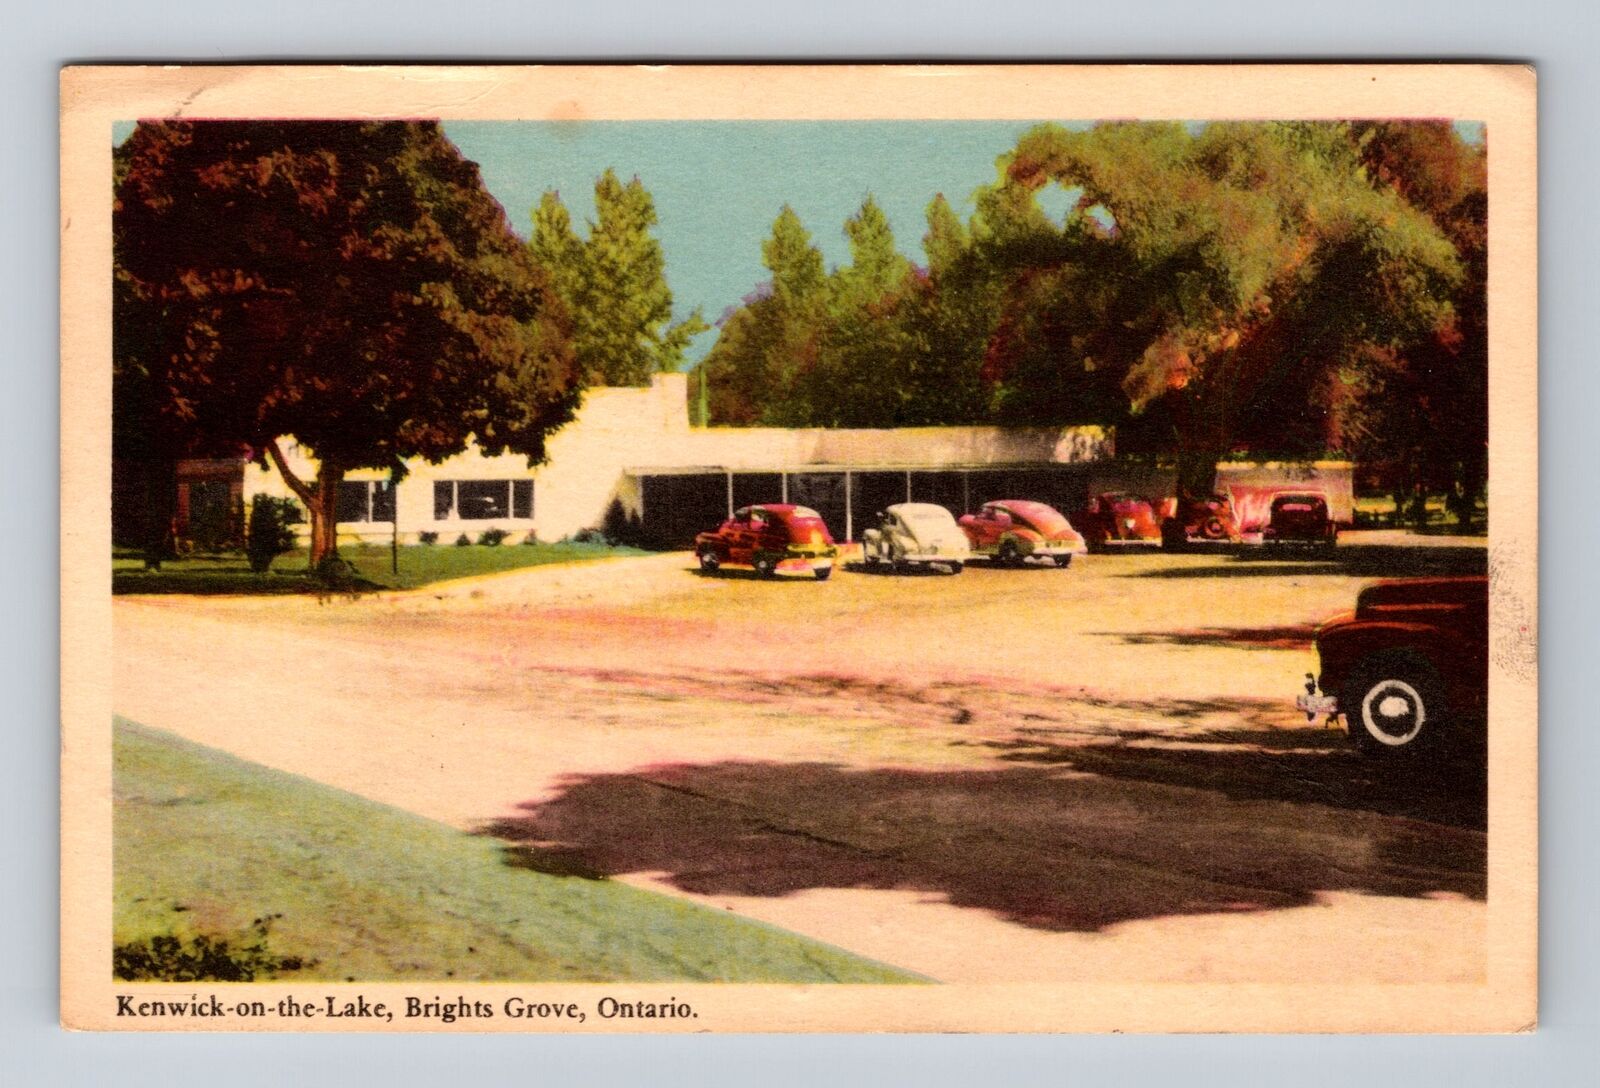 Brights Grove Canada, Kenwick-on-the-Lake, Advertising, Vintage c1952 Postcard